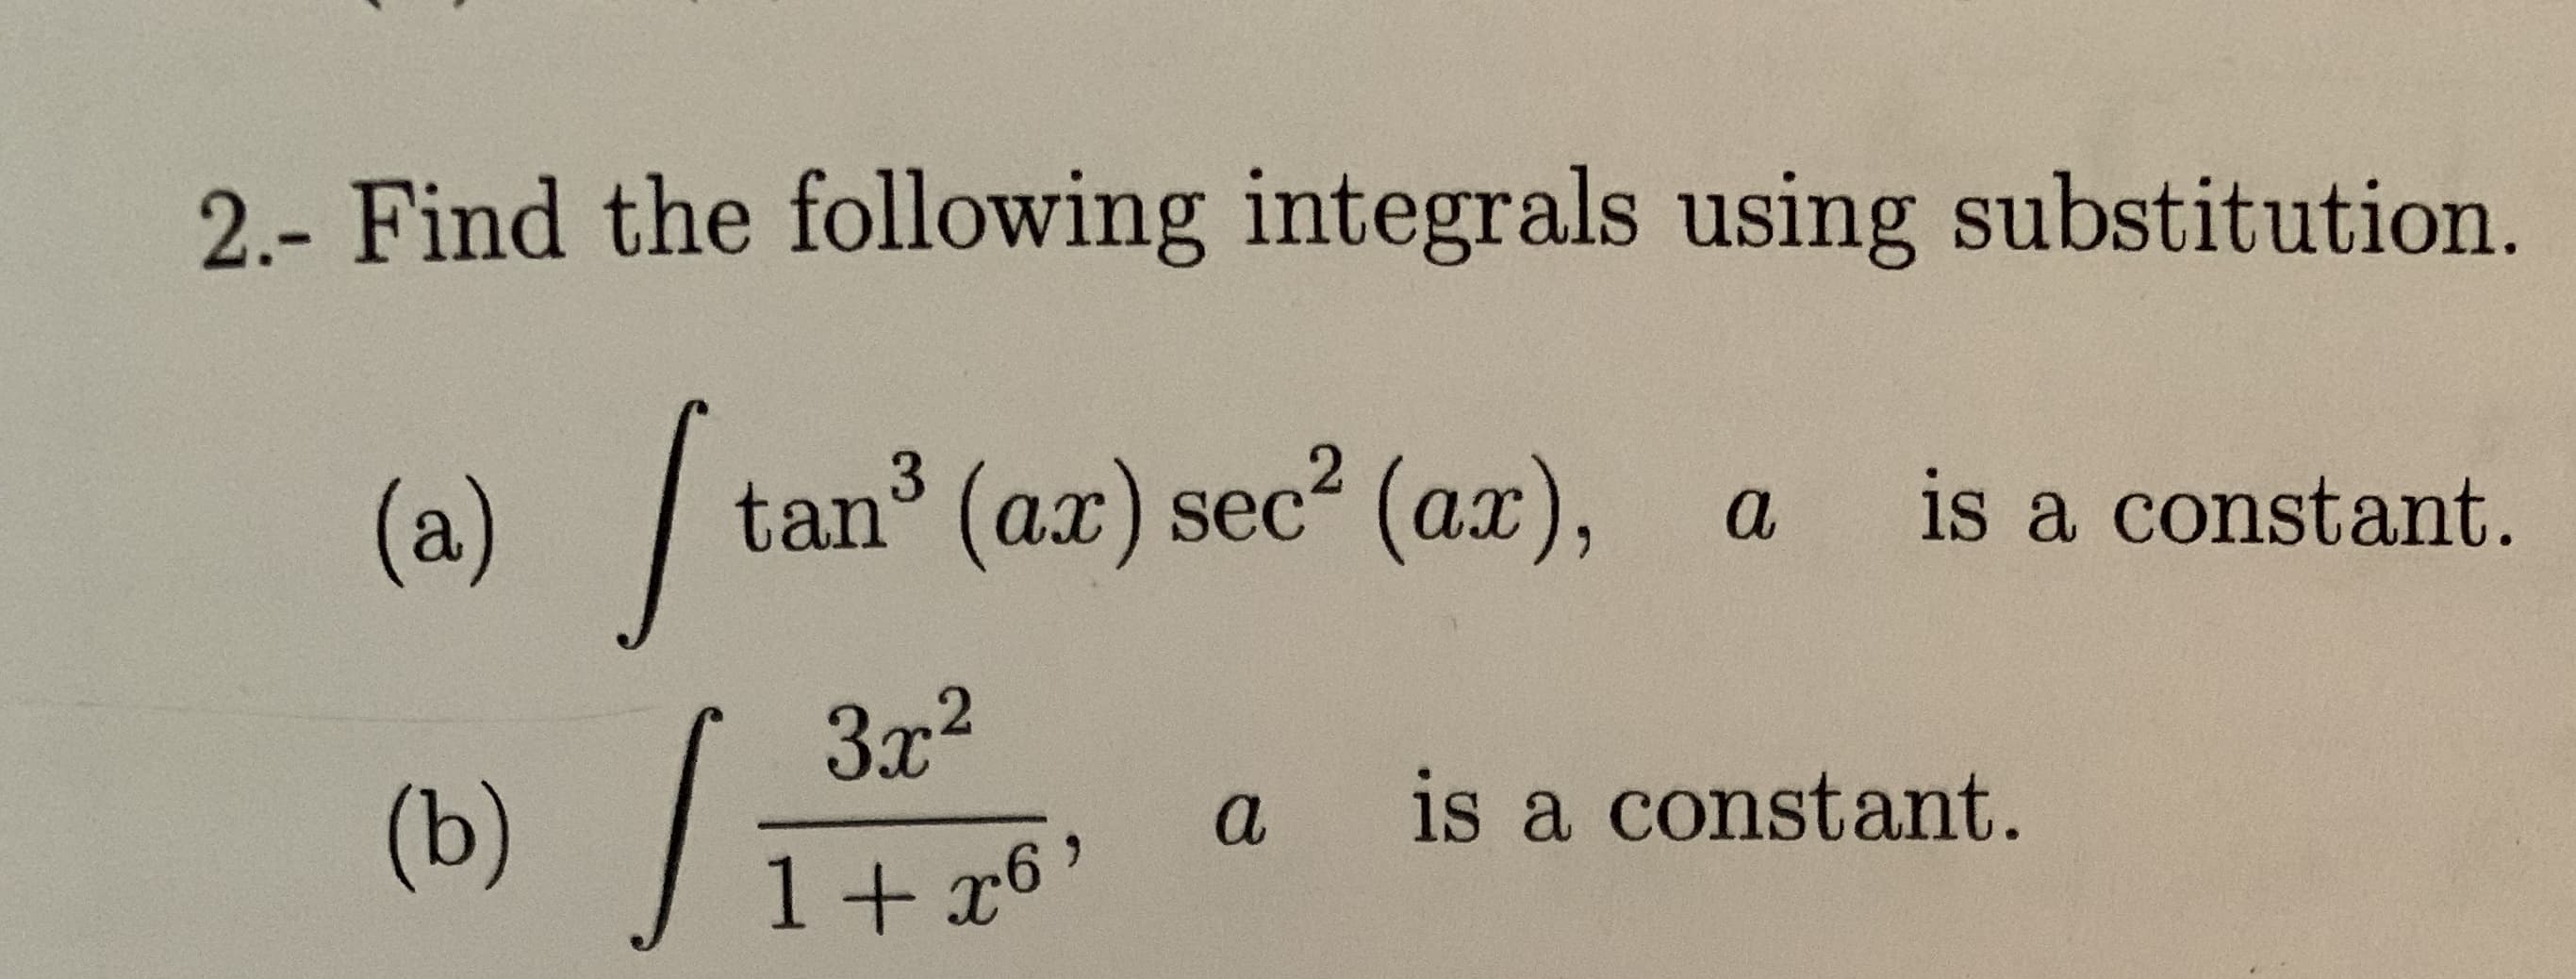 2.- Find the following integrals using substitution.
3
tan (ax) sec (ax),
(a)
is a constant.
a
3x2
/
(b)
is a constant.
a
1 + r6'
